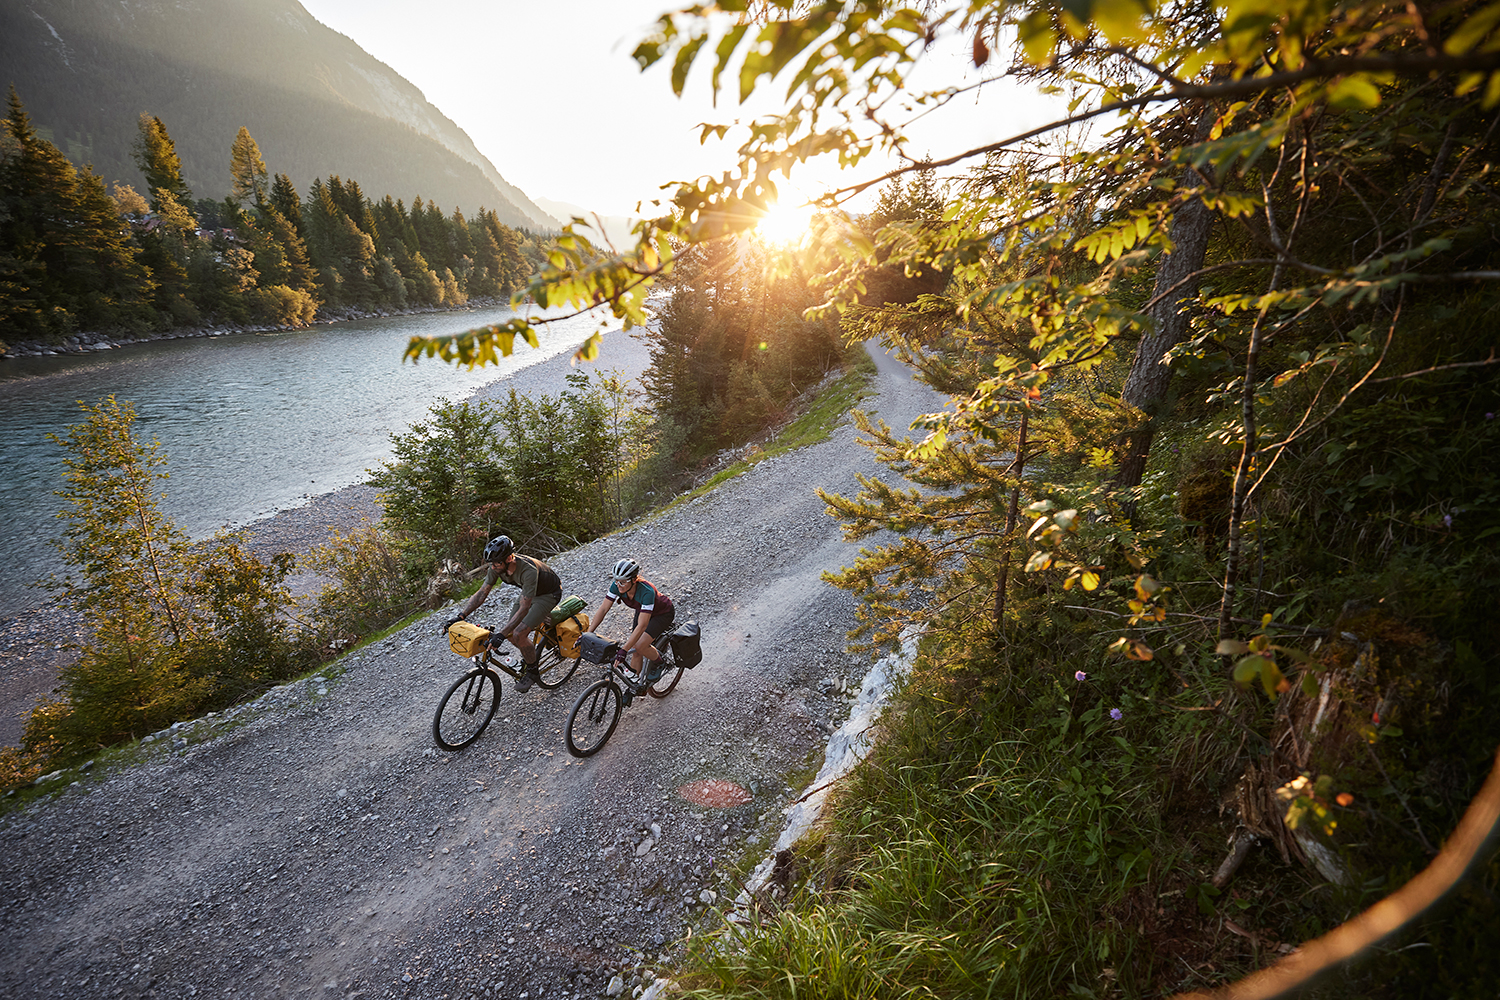 Couple cycling along a gravel road next to a river at sunrise